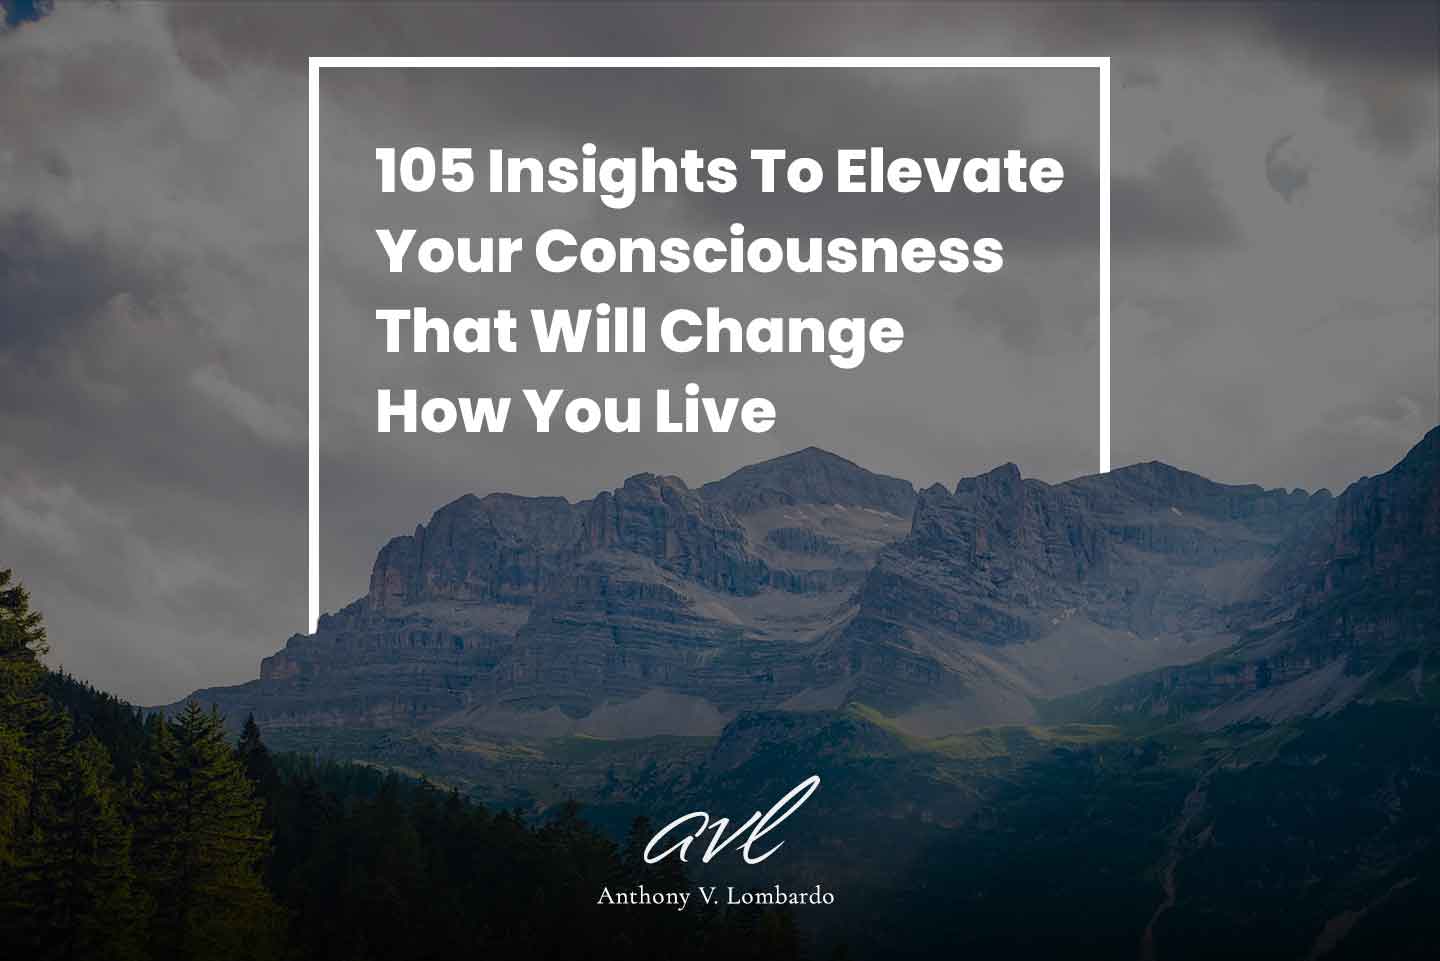 105 Insights To Elevate Your Consciousness That Will Change How You Live